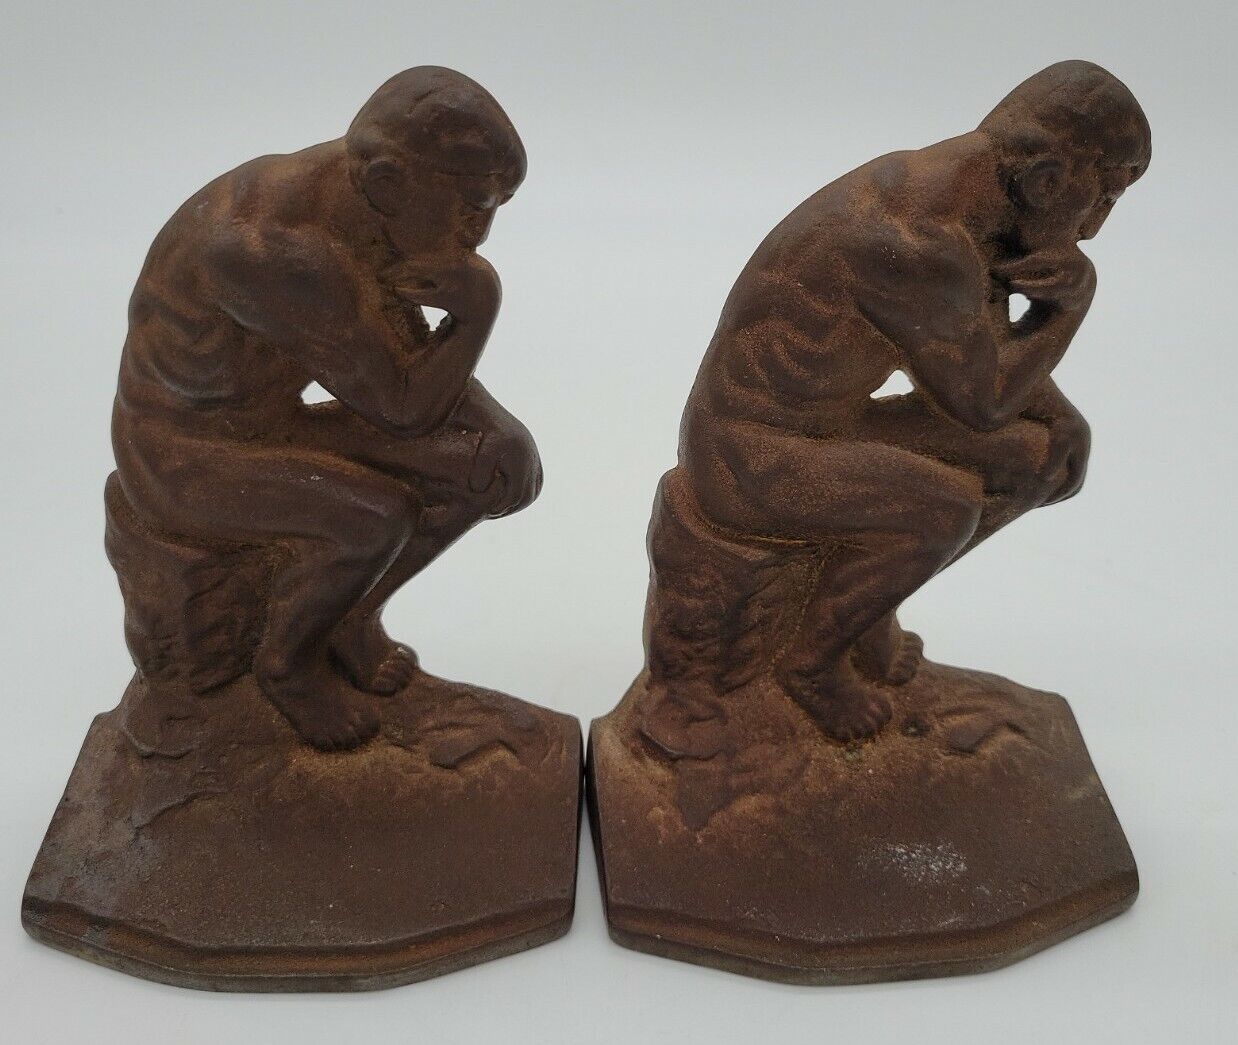 1927 BOOKENDS art deco The Thinker CAST IRON GIFT HOUSE N.Y.C